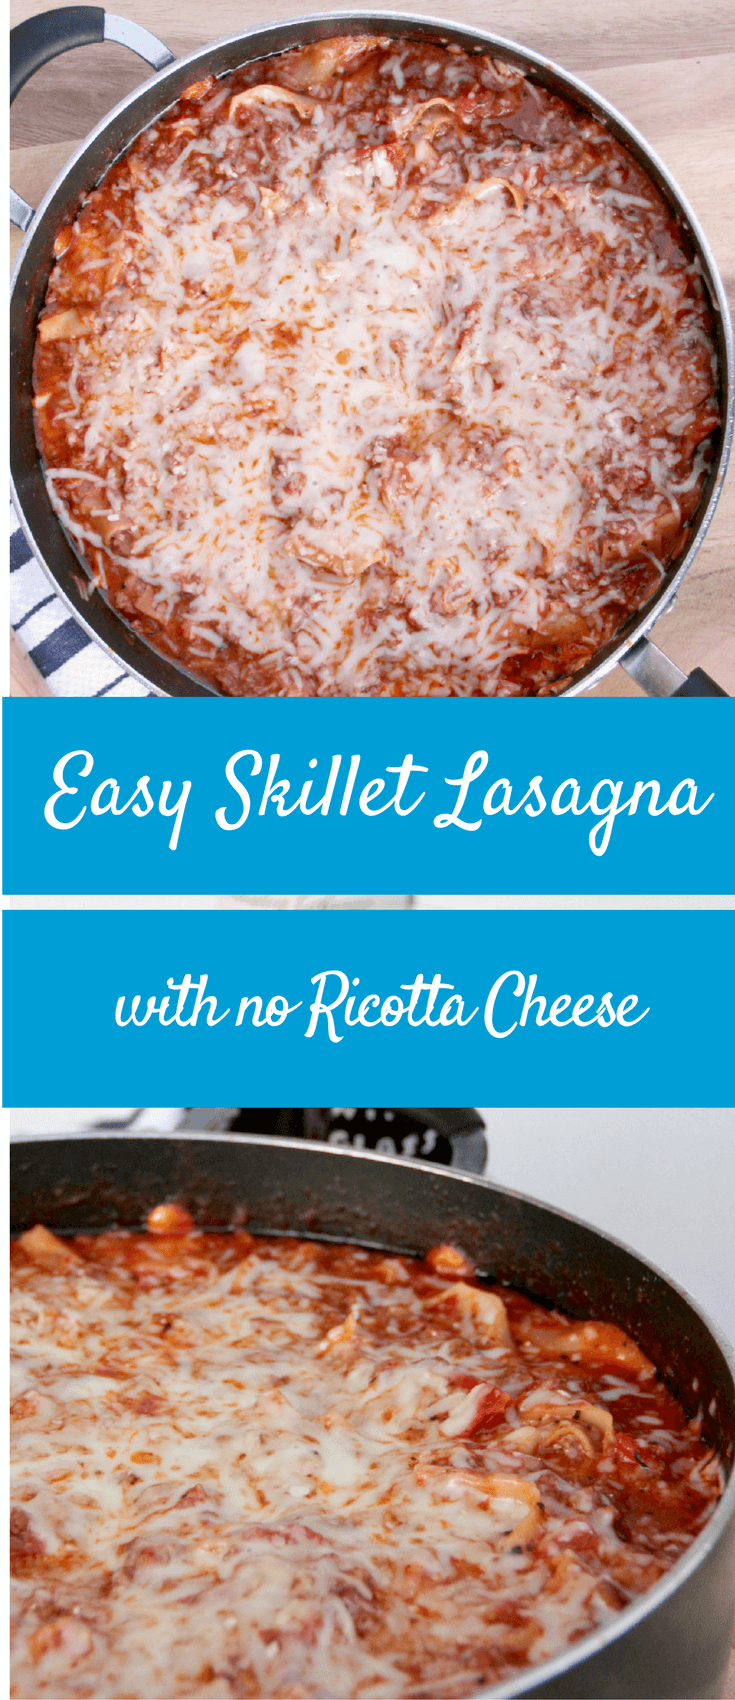 Easy skillet lasagna without ricotta cheese—just sausage and ground beef, tomatoes, noodles, and three cheeses! This recipe is quick, easy, and kid-friendly!